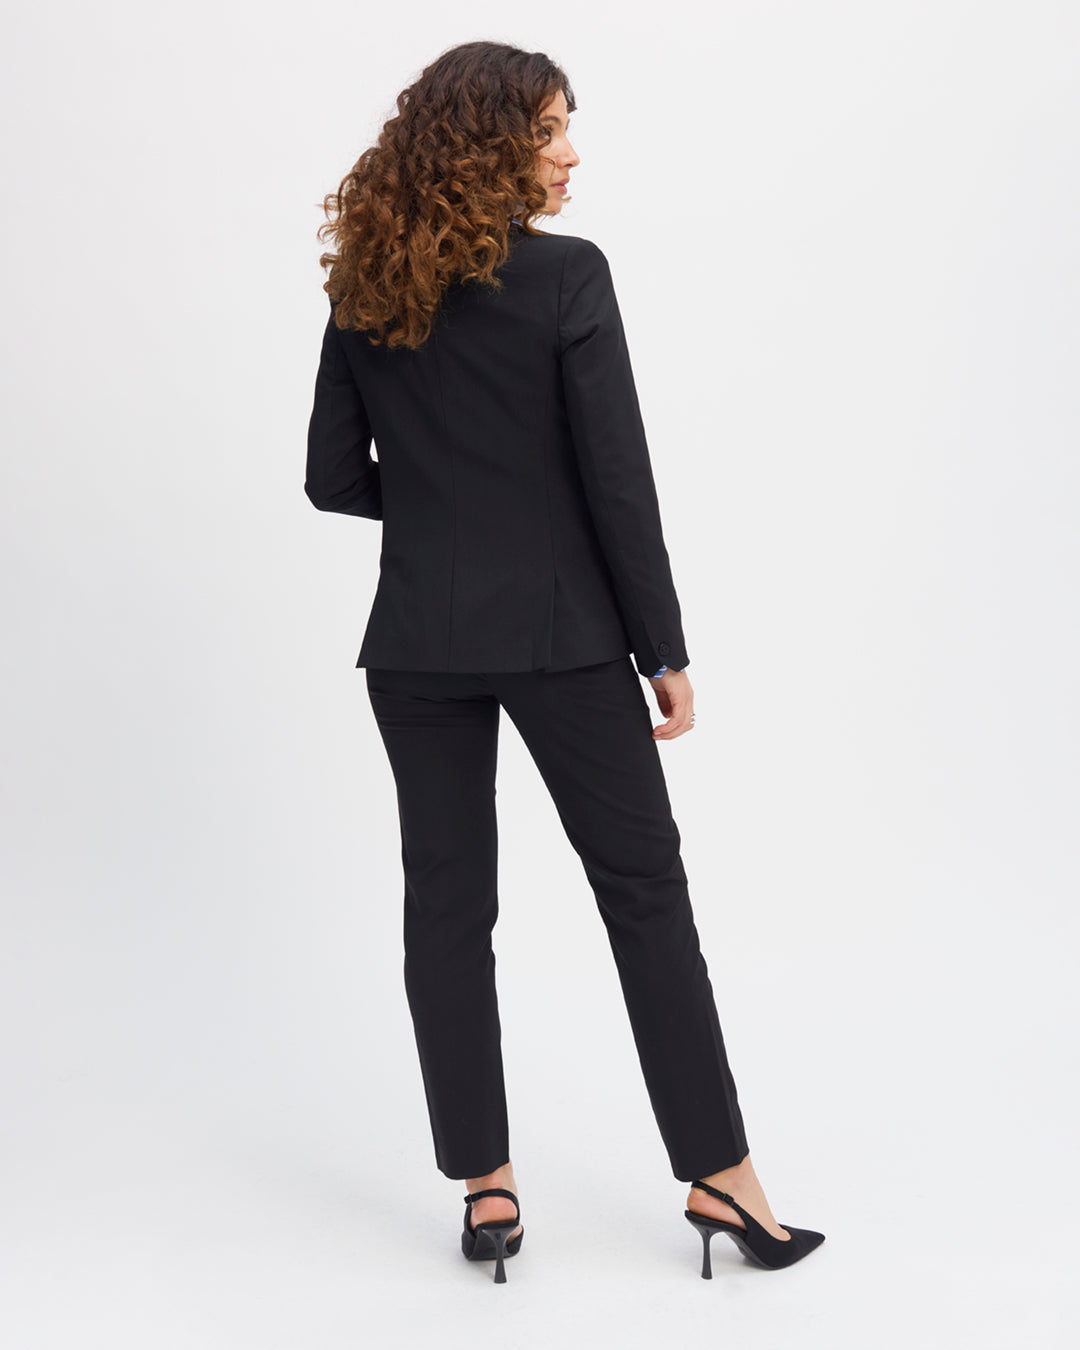 Black-blazer-suit-jacket-waist-cut-suit-collar-length-below-the-bottom-two-pockets-breasted-two-pockets-inside-fully-lined-17H10-suit-jacket-for-women-paris-